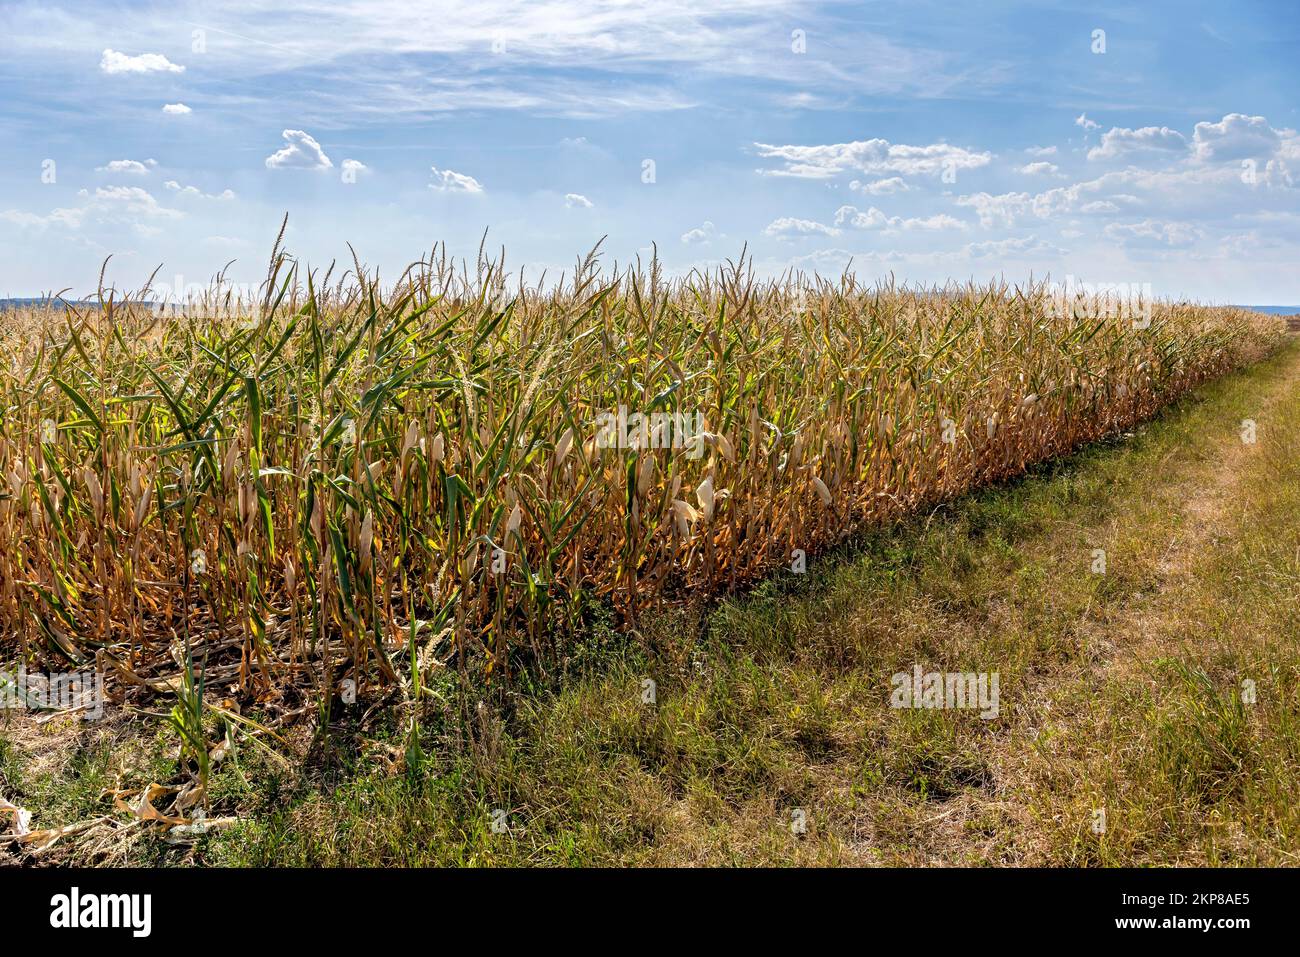 Corn, maize (Zea mays) field, dried out, withered, crop damage, heat, drought, water shortage, climate change, Hesse, Germany, Europe Stock Photo